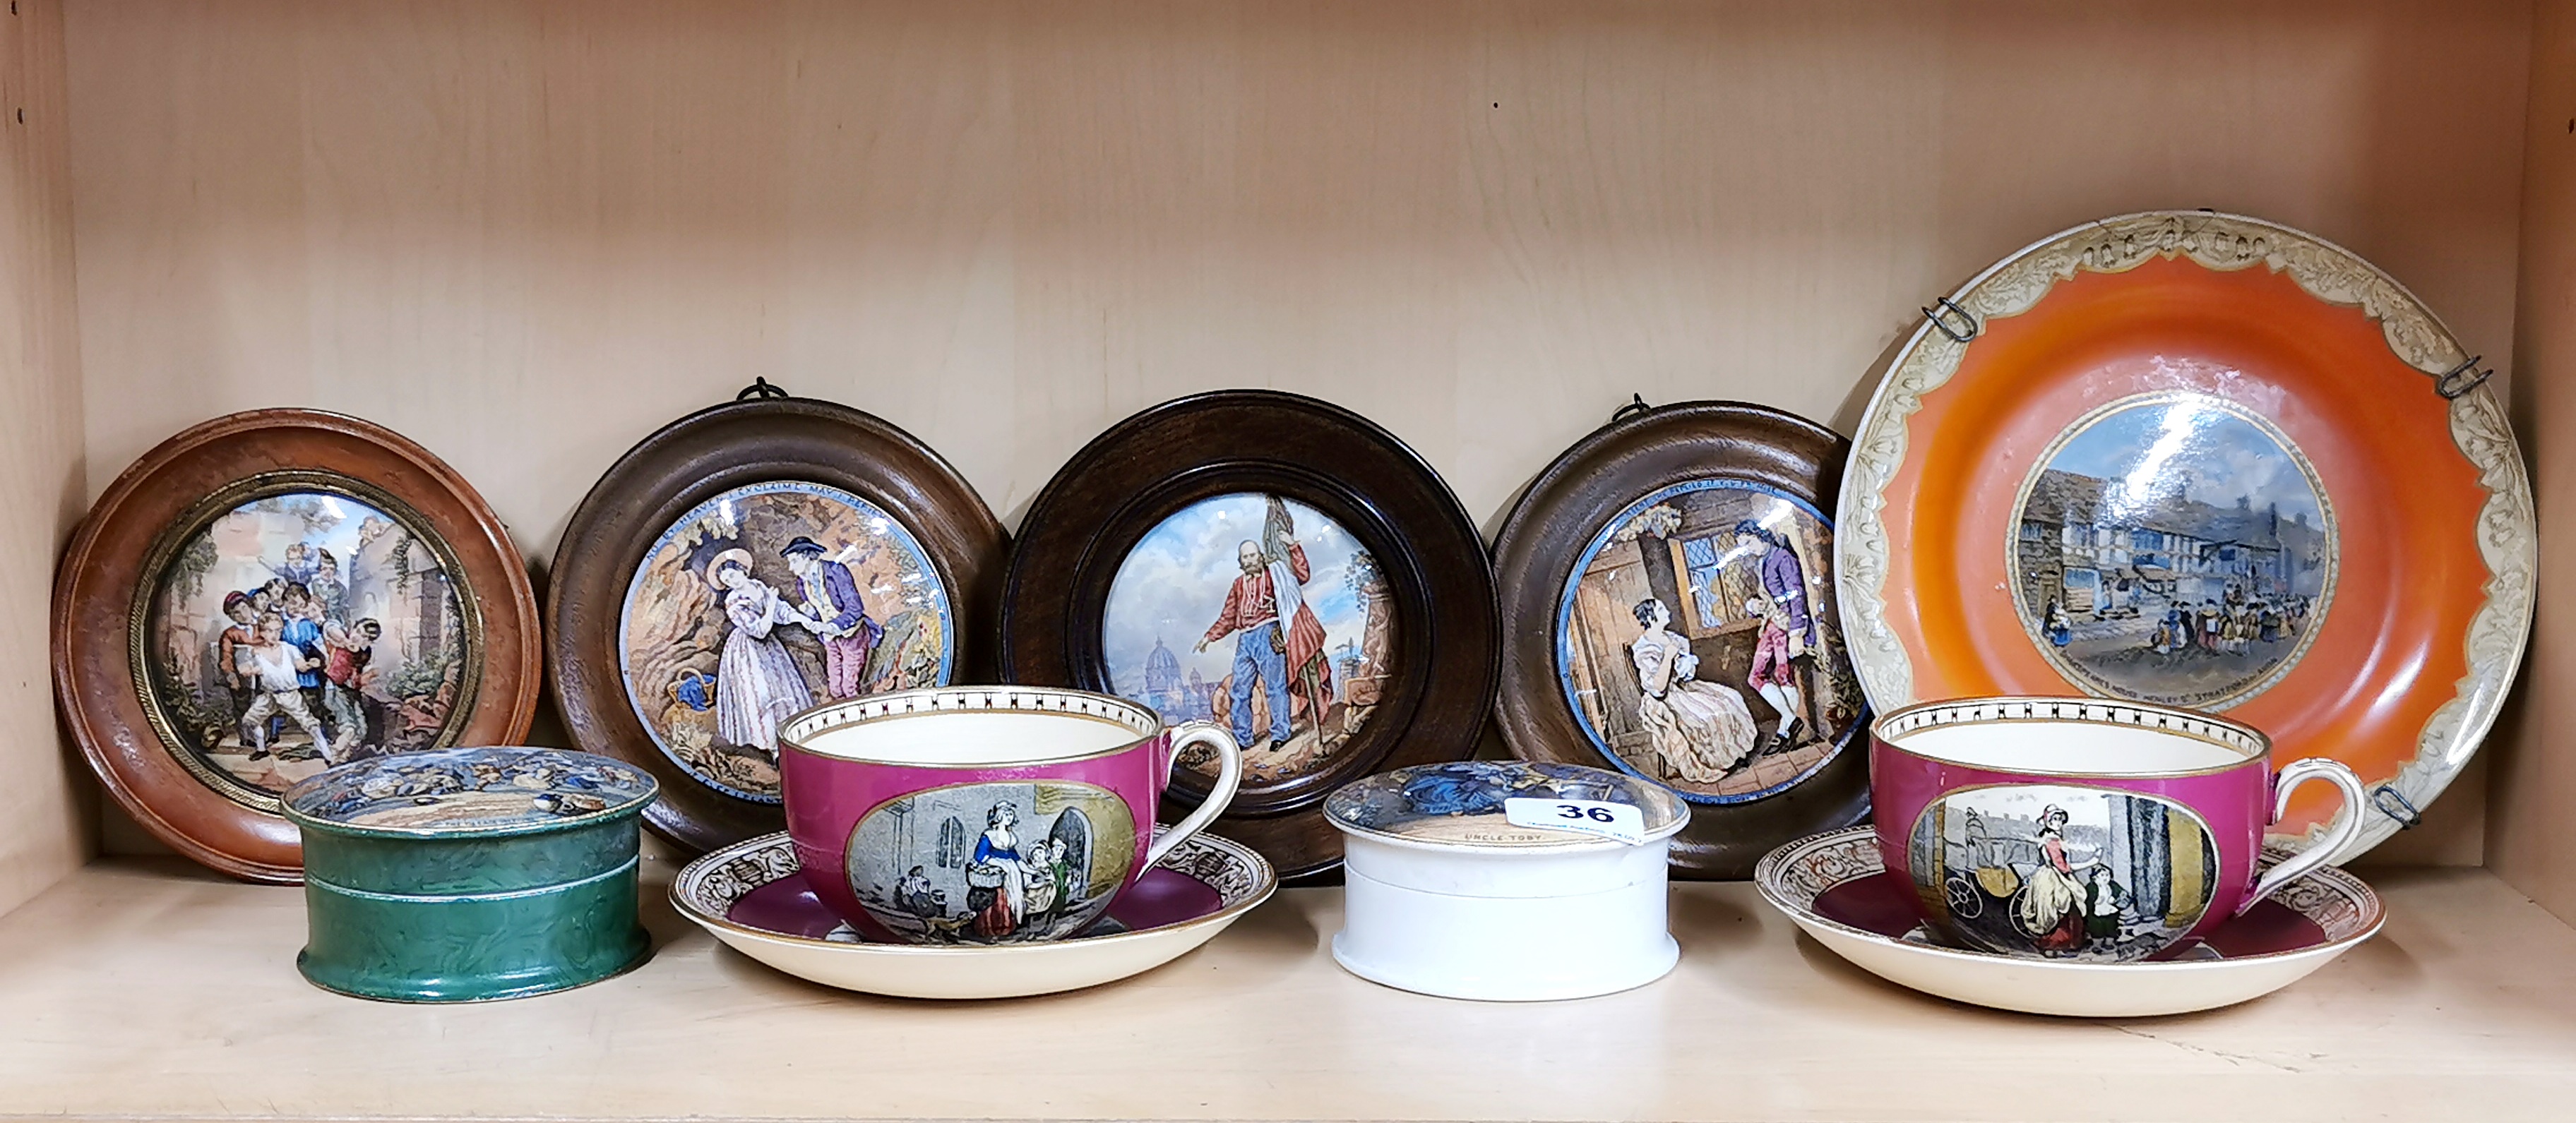 A group of 19th century Pratt ware pot lids and plate, with a pair of Addams Cries of London cups